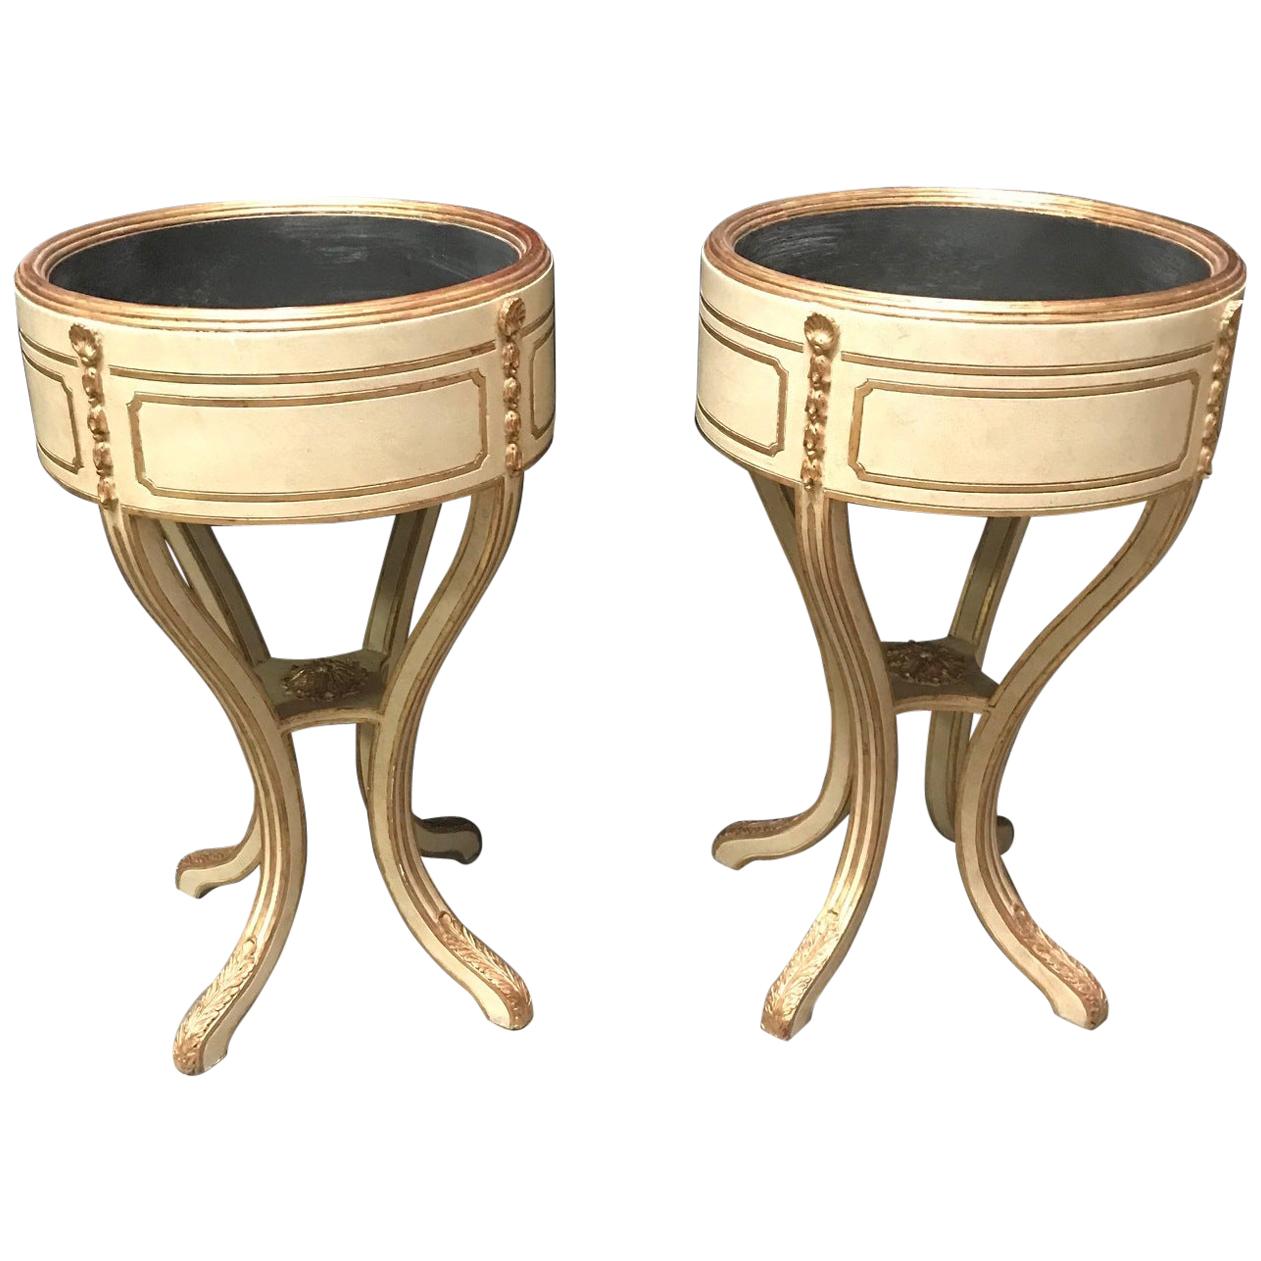 Pair of Italian Neoclassical Style Painted Jardinière